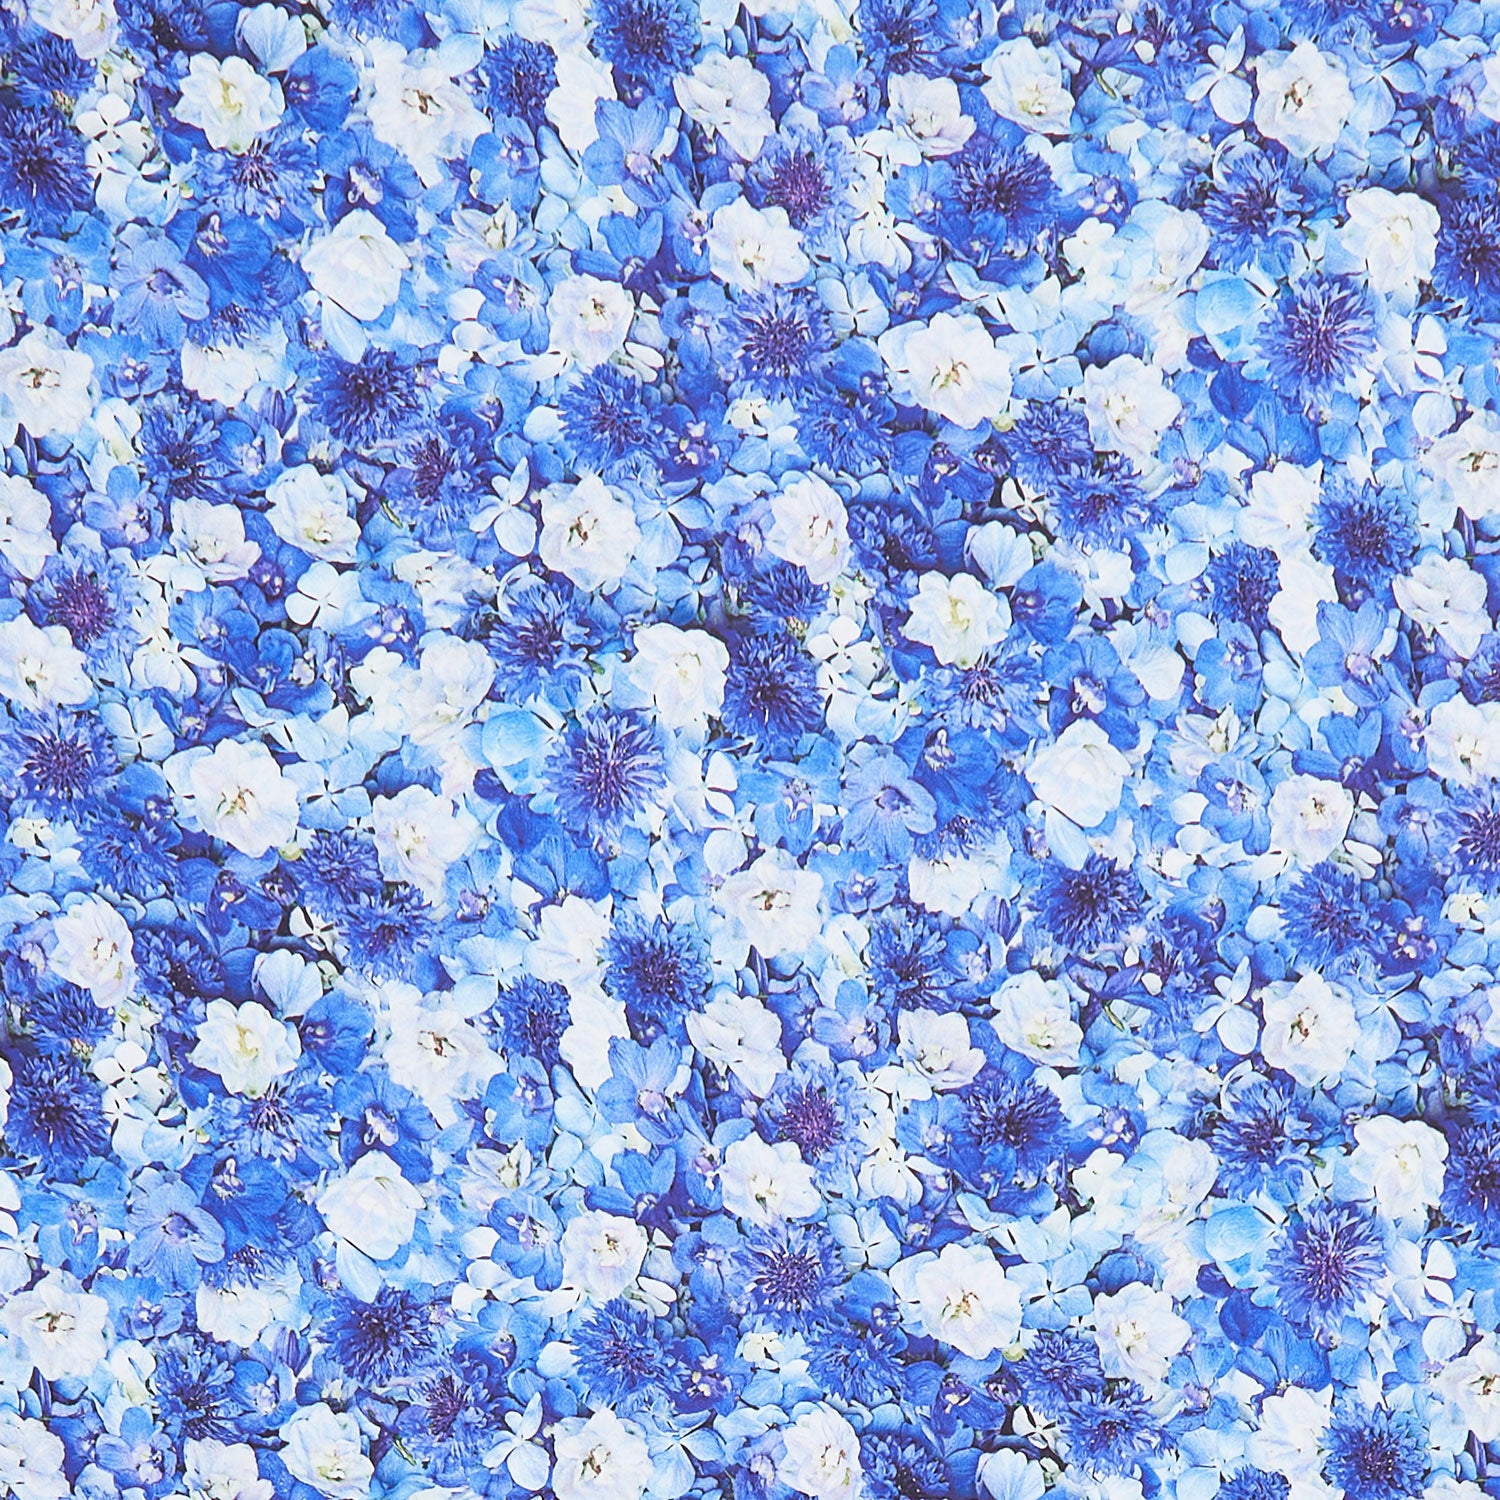 Hand Picked - Forget Me Not Delft Blue Pale Blue Yardage